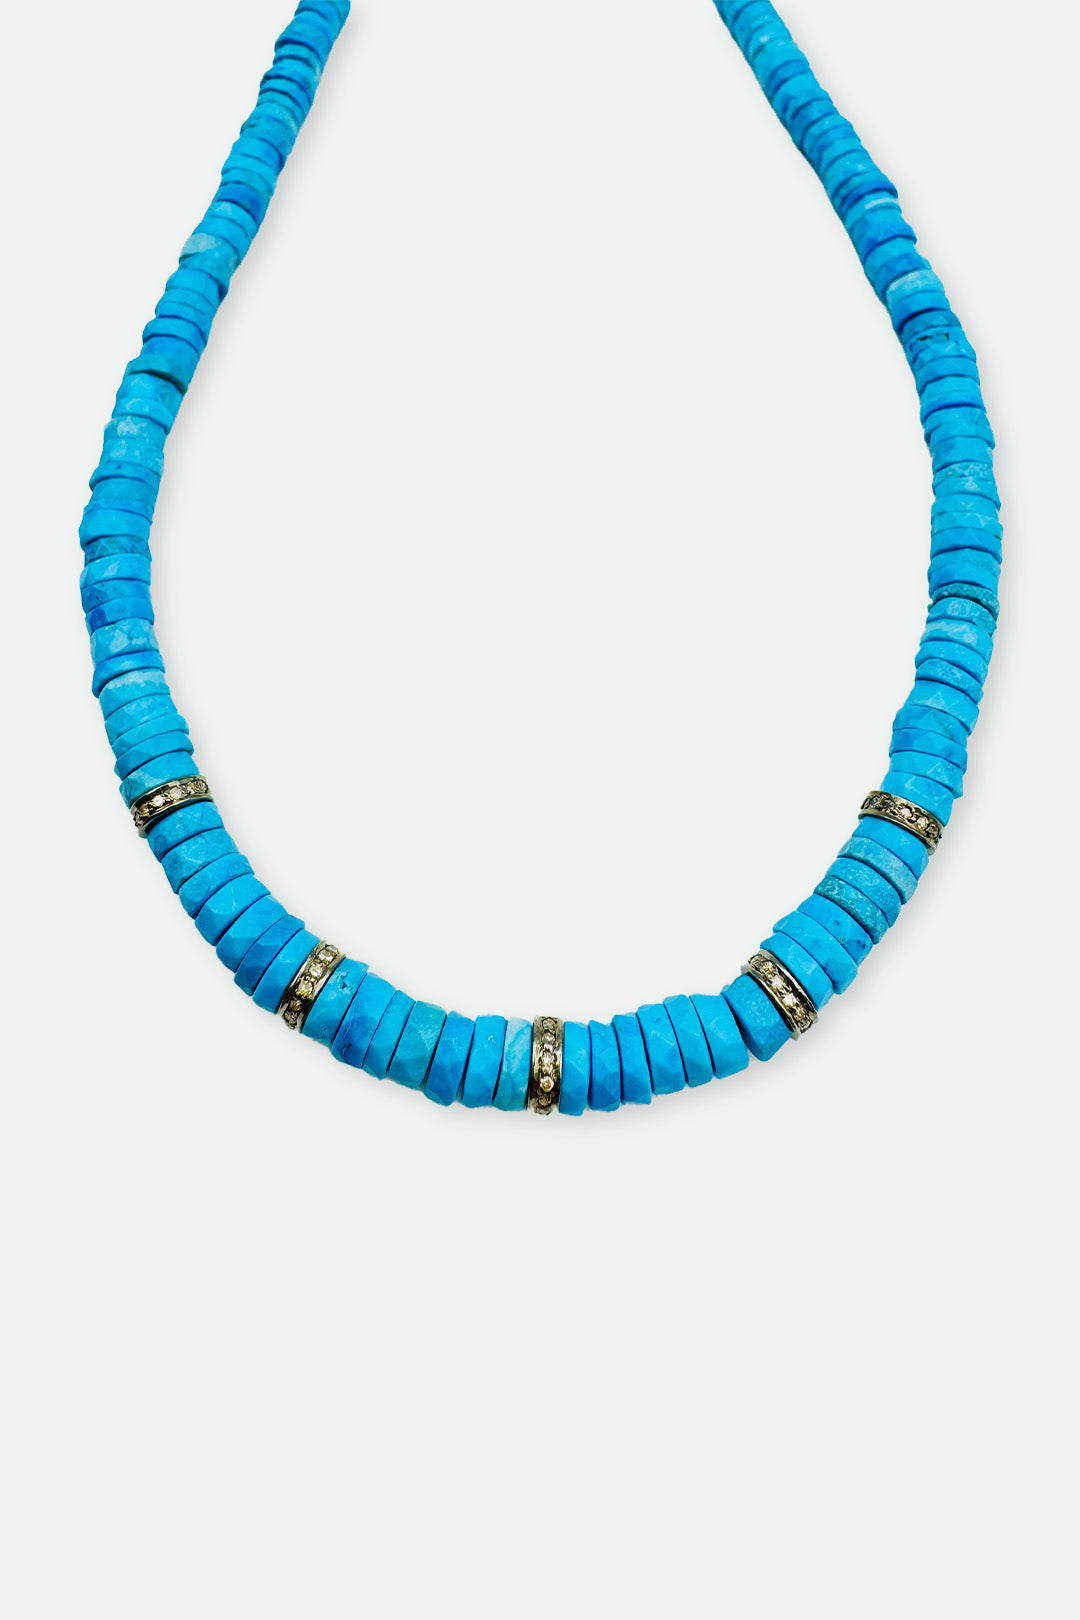 Turquoise Necklace Heishi Beads with 5 Diamond Spacer